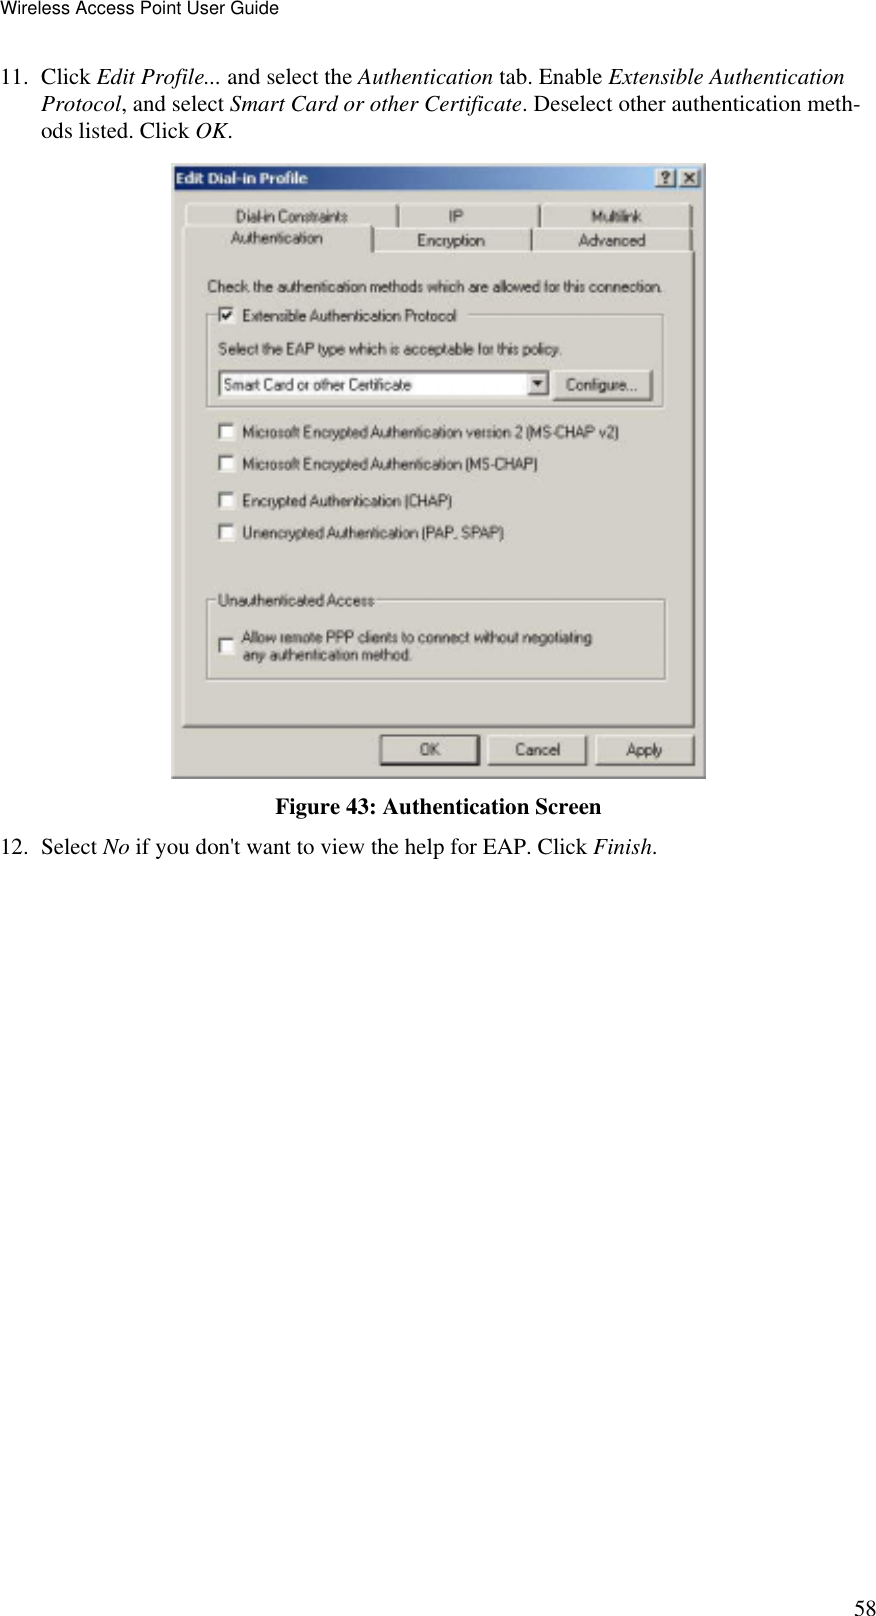 Wireless Access Point User Guide 58 11. Click Edit Profile... and select the Authentication tab. Enable Extensible Authentication Protocol, and select Smart Card or other Certificate. Deselect other authentication meth-ods listed. Click OK.   Figure 43: Authentication Screen 12. Select No if you don&apos;t want to view the help for EAP. Click Finish.  